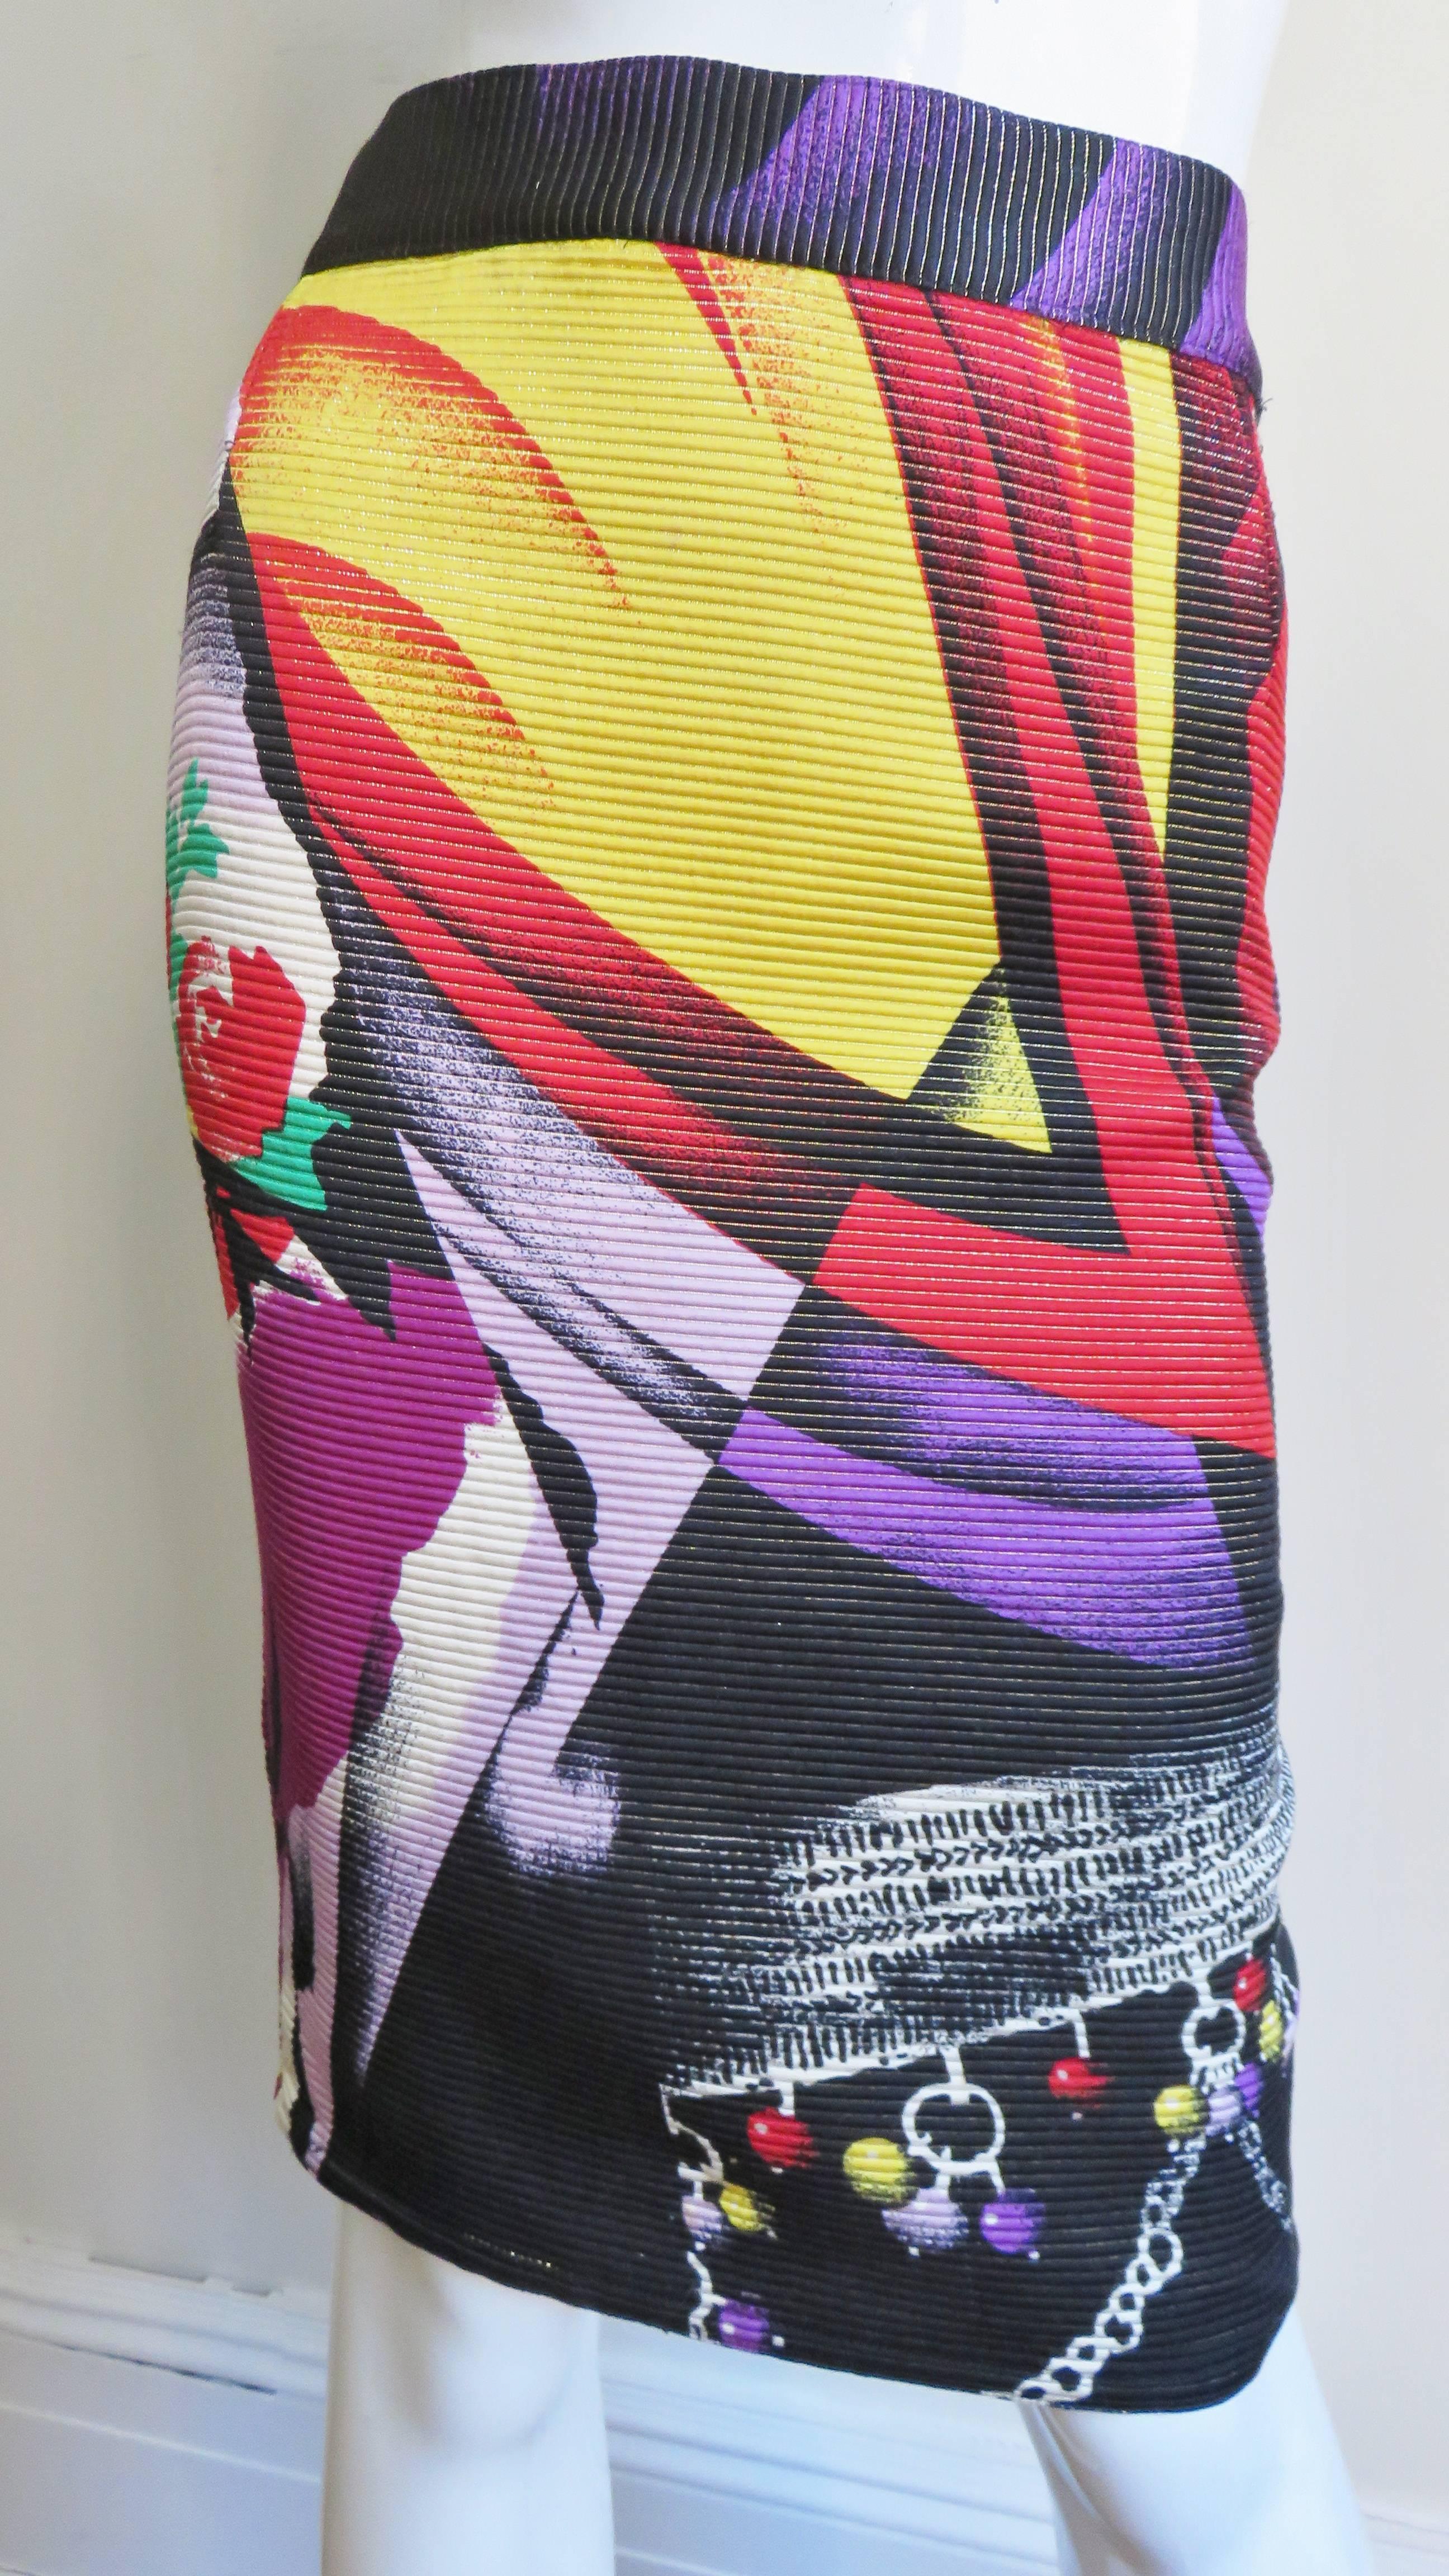 A gorgeous colorful silk skirt by Gianni Versace in a pattern of abstract shapes and flowers. It is pencil style with a waistband and button closing, side zipper and silk lining.  
Fits size Medium.

Waist  32